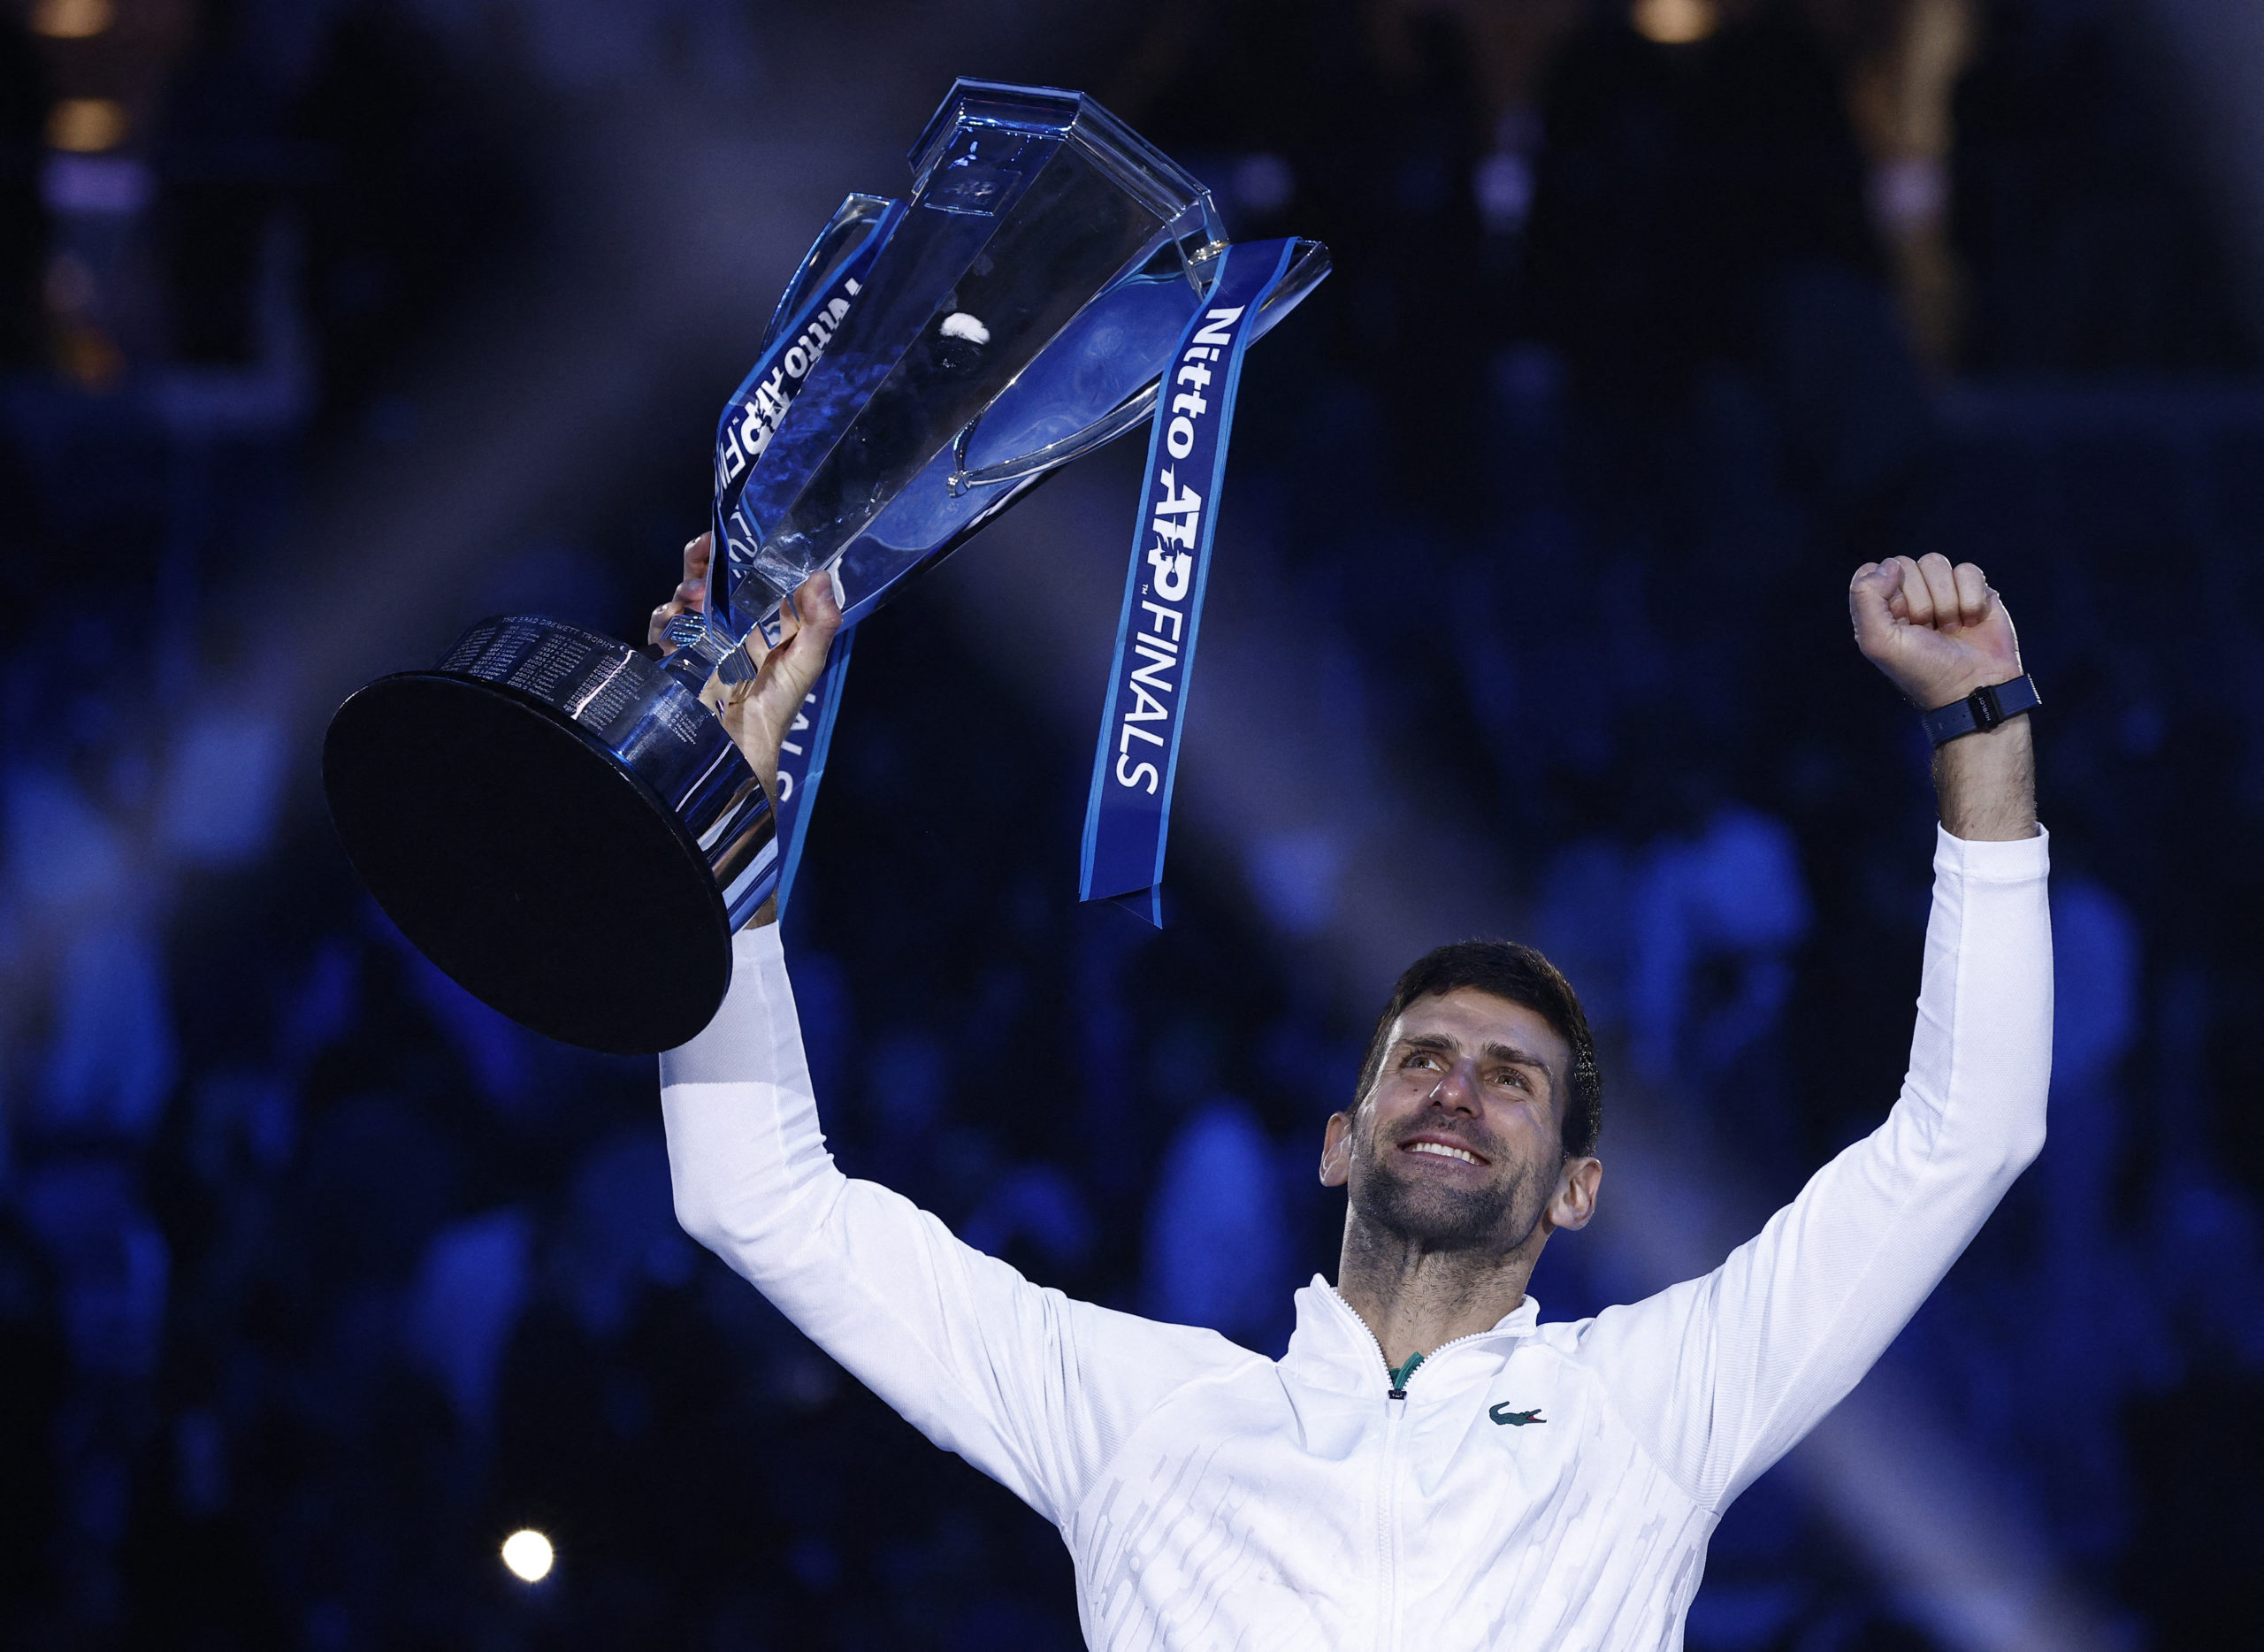 Tennis - ATP Turin Finals - Pala Alpitour, Turin, Italy - November 20, 2022 Novak Djokovic of Serbia celebrates with the championship trophy after winning the men's singles final against Casper Ruud of Norway